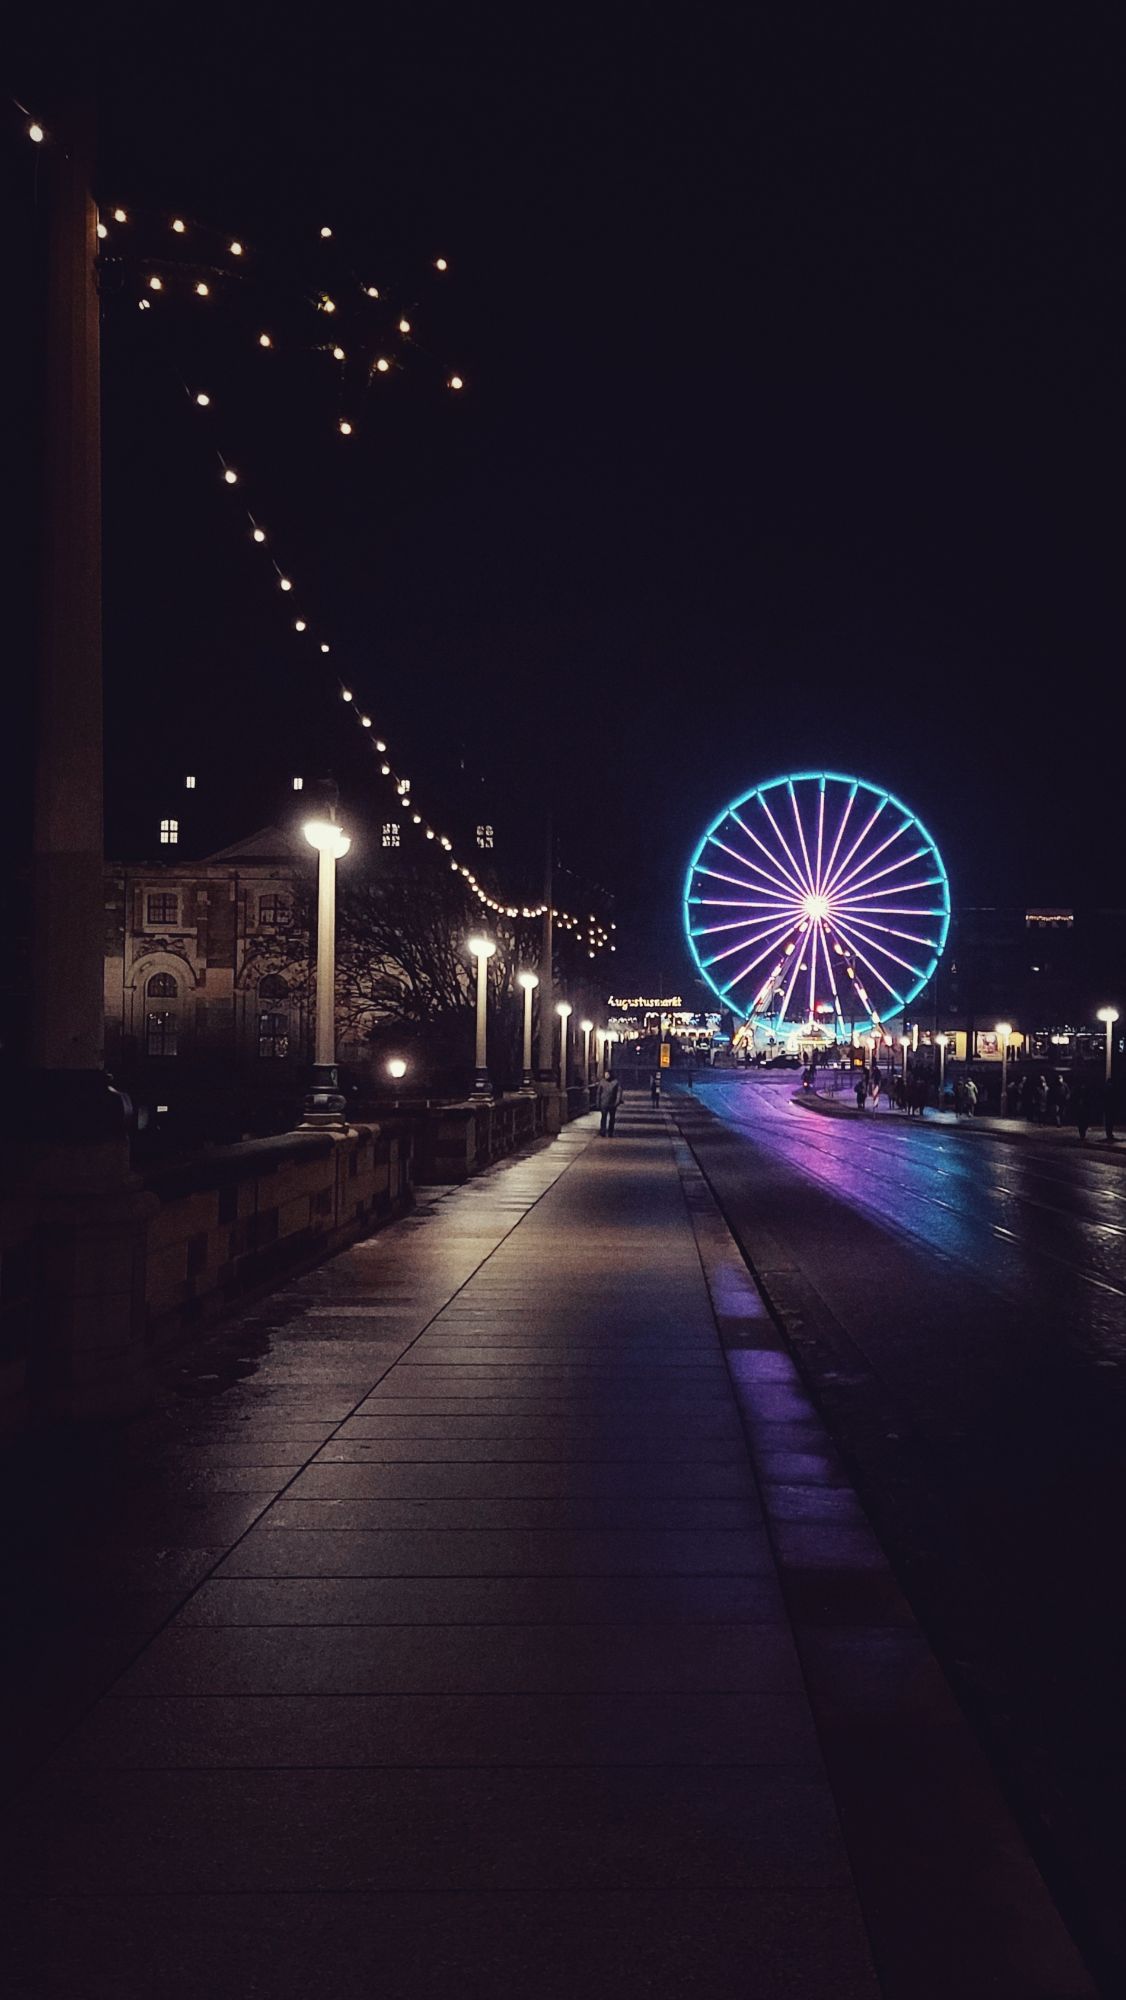 A coloured ferris wheel at the end of a street. Some featureless people. Night scene.